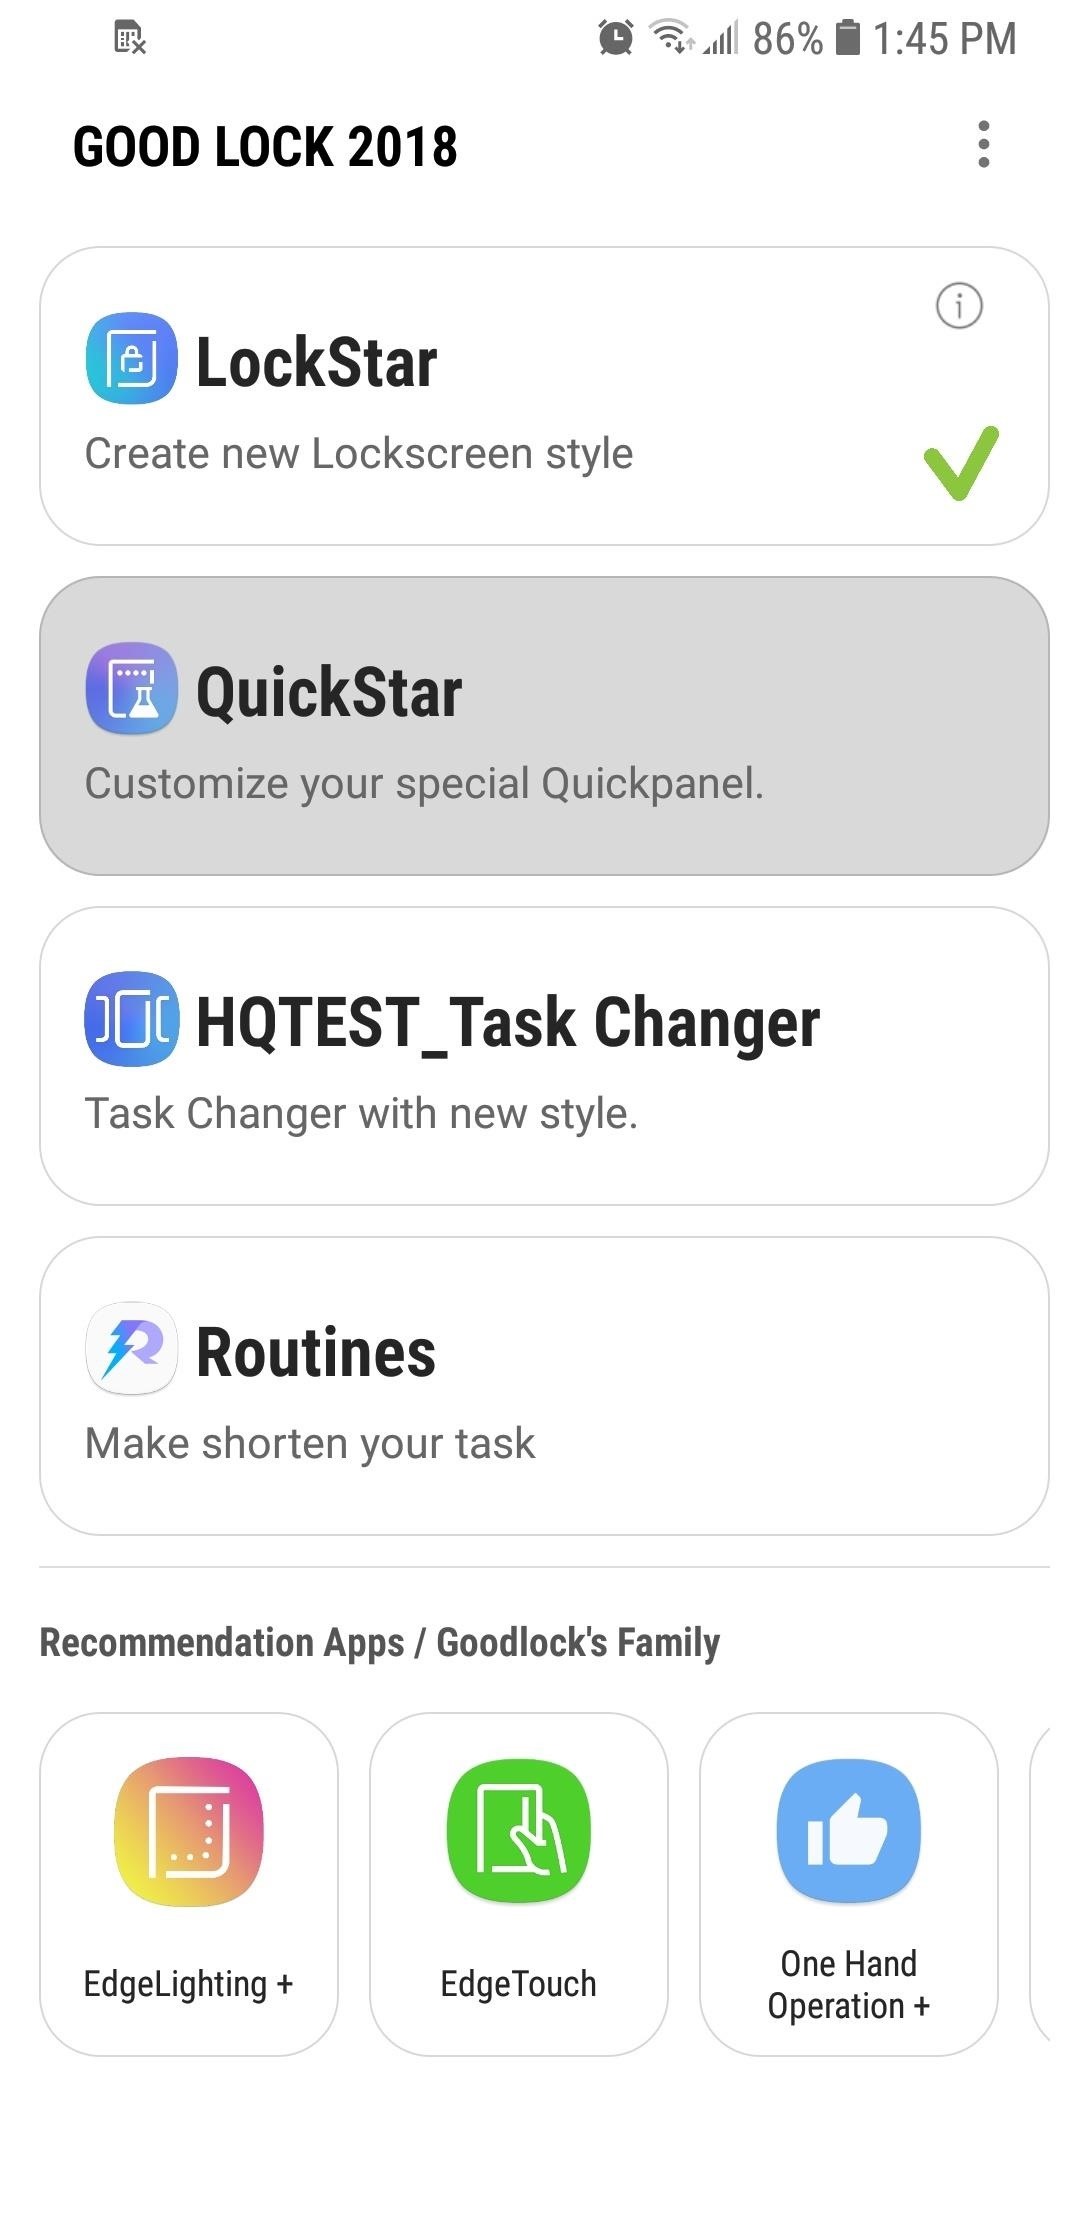 How to Get a Transparent Quick Settings Panel on Your Galaxy S8 or S9